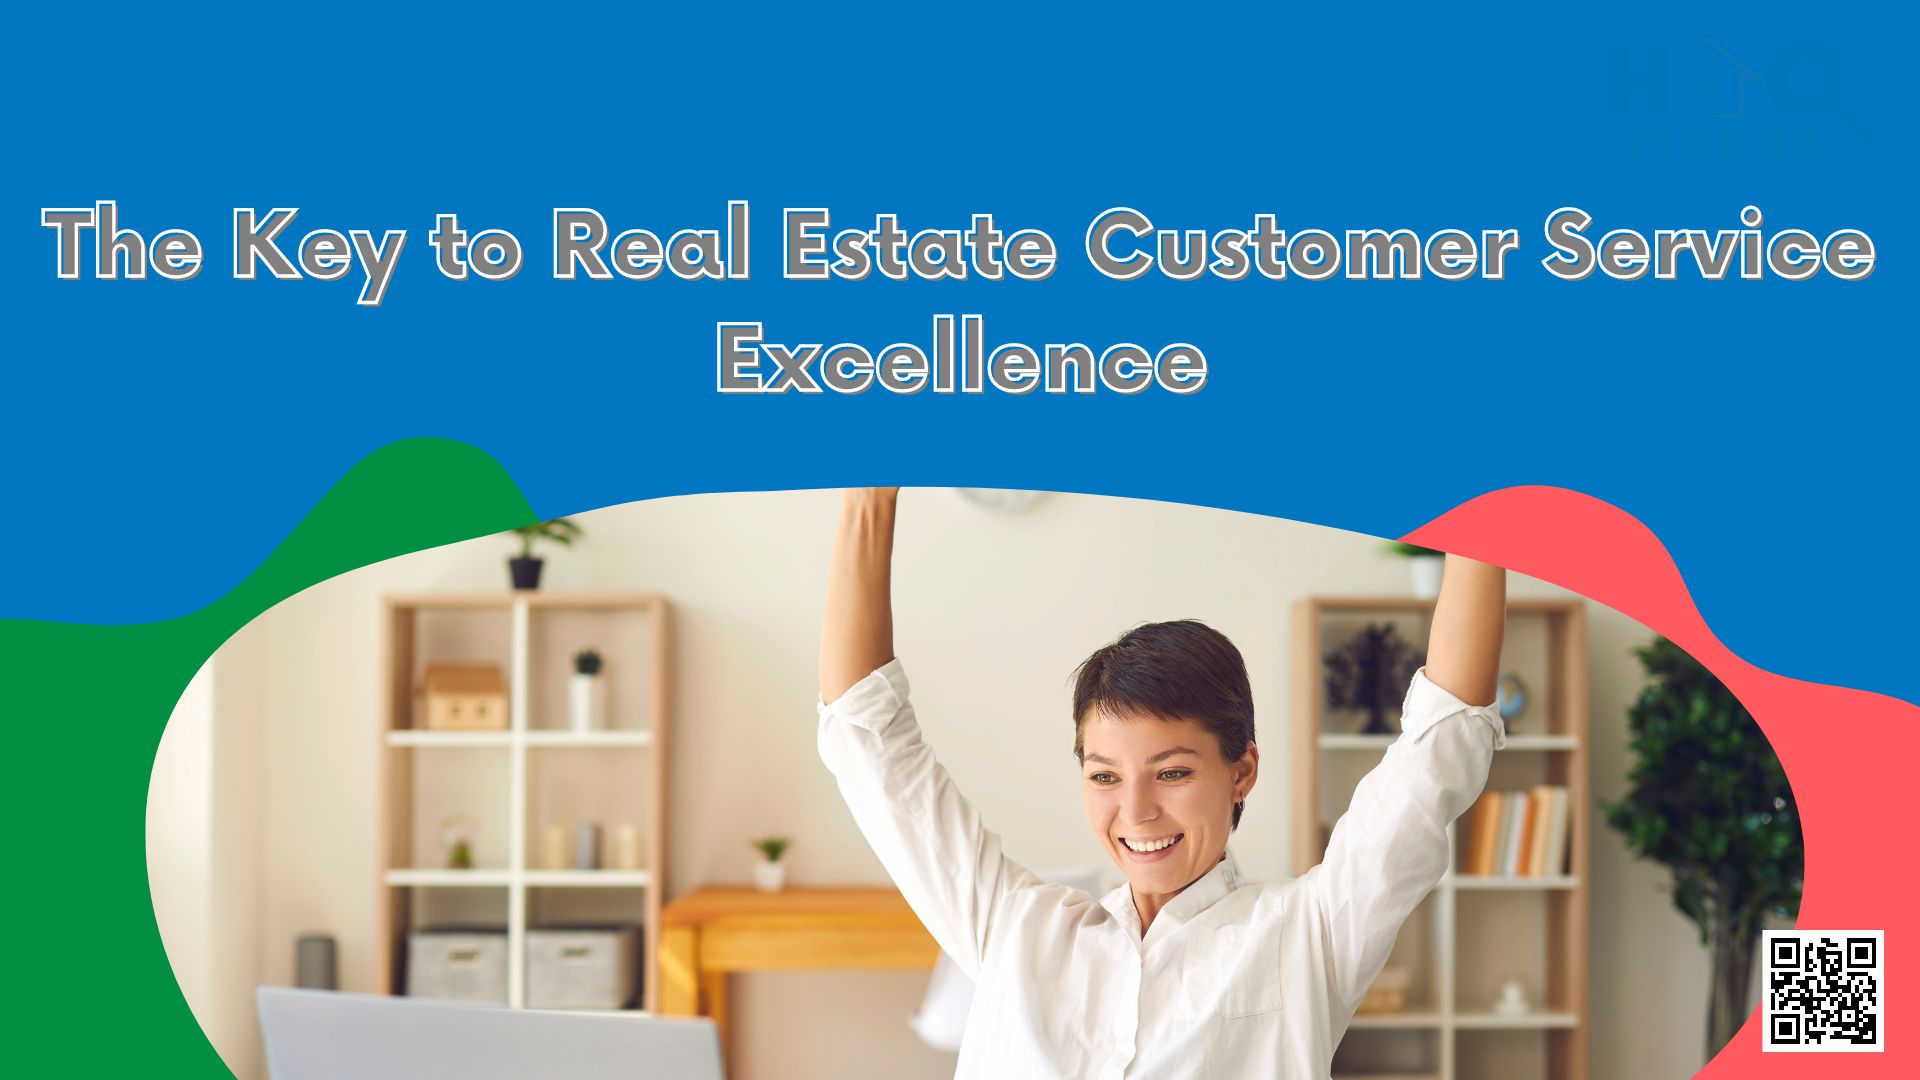 The Key to Real Estate Customer Service Excellence